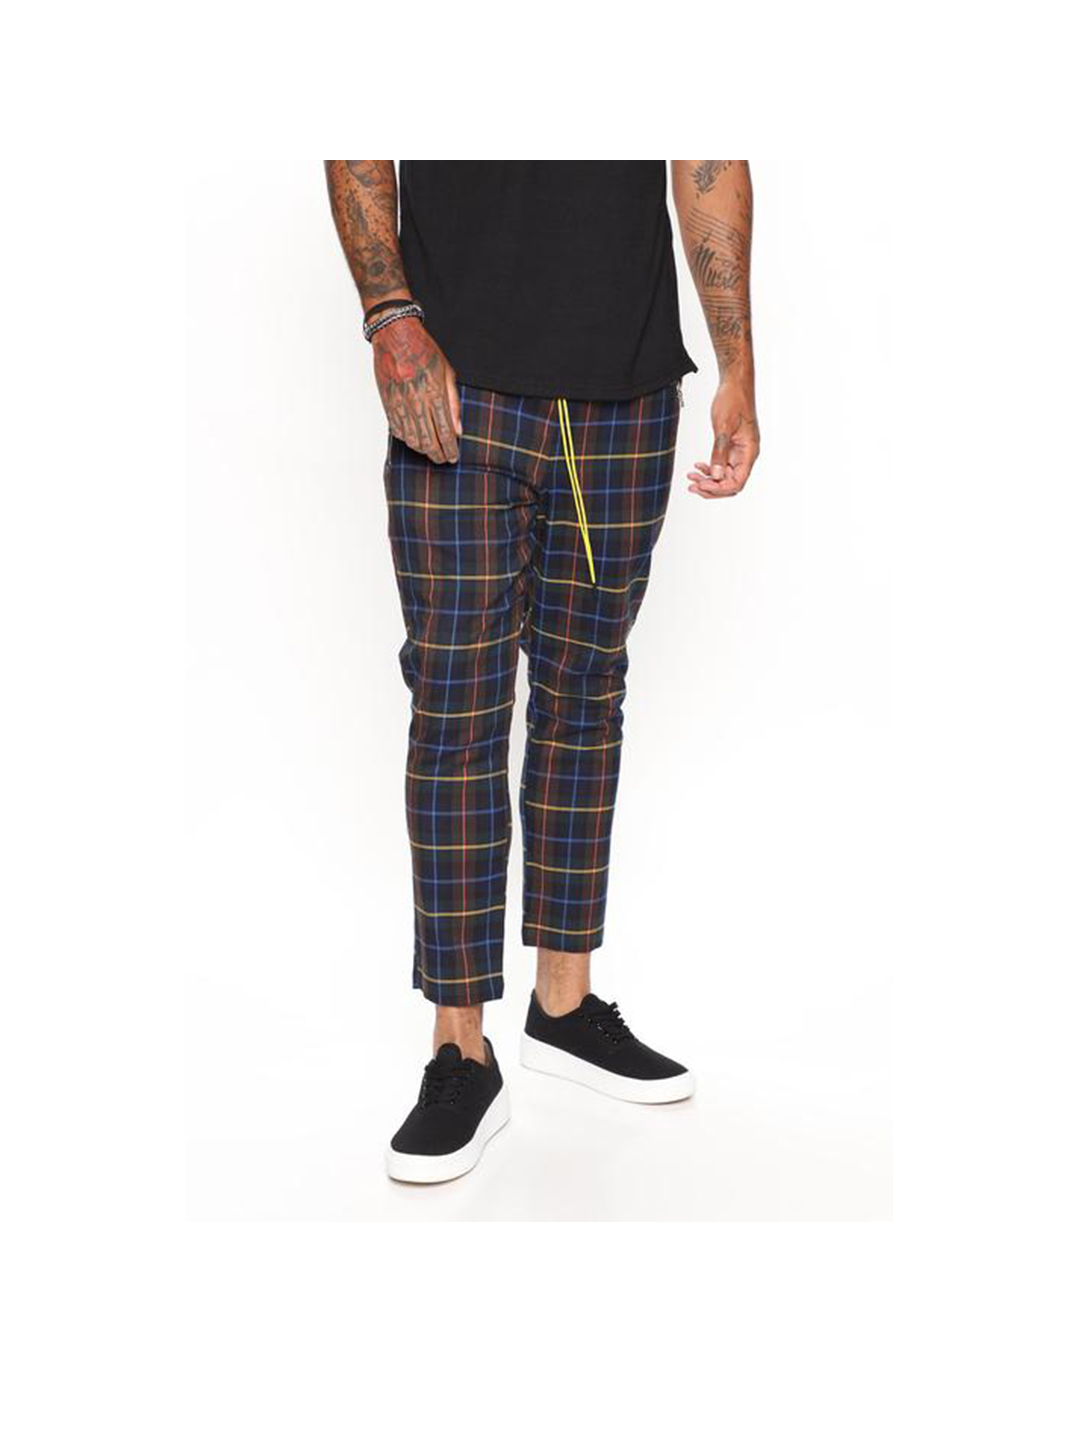 Andrew Colorful Check Casual Pants-poisonstreetwear.com